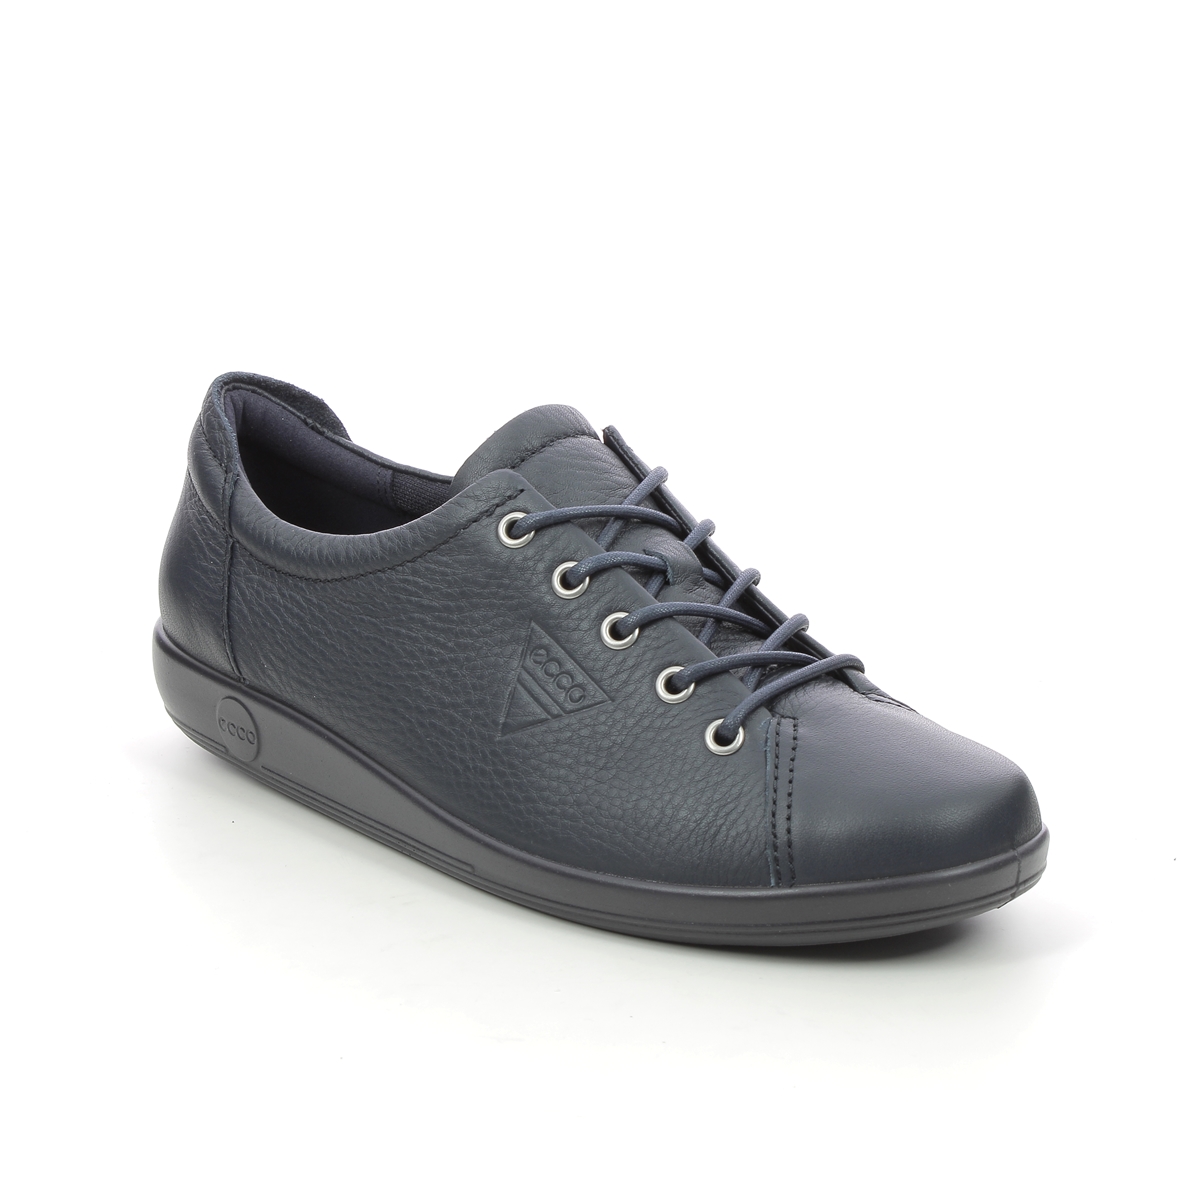 Ecco Soft 2.0 Navy Leather Womens Lacing Shoes 206503-11038 In Size 36 In Plain Navy Leather